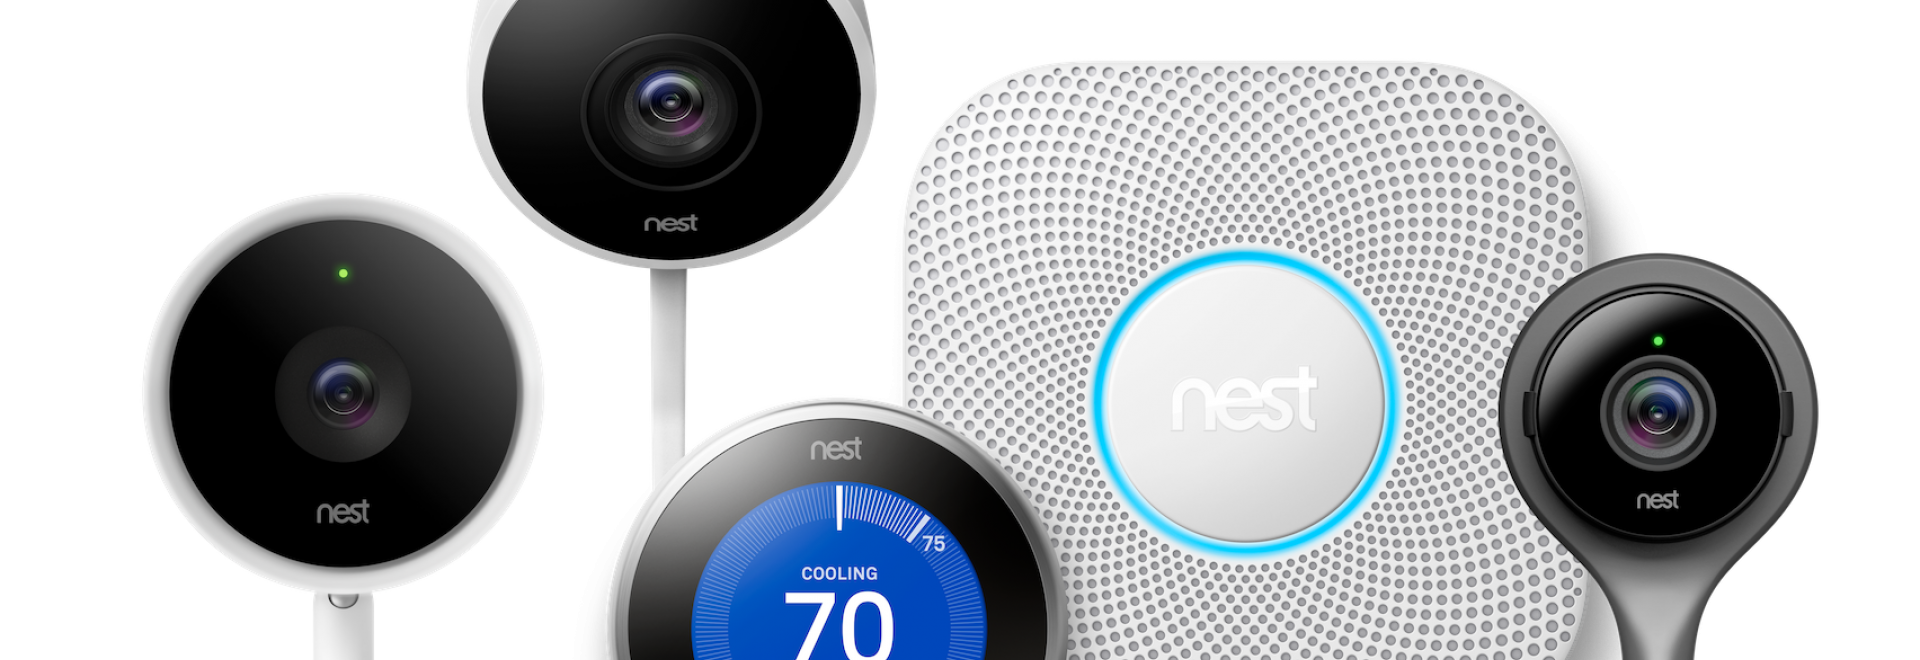 Nest Pro Elite Smart Thermostat and security camera